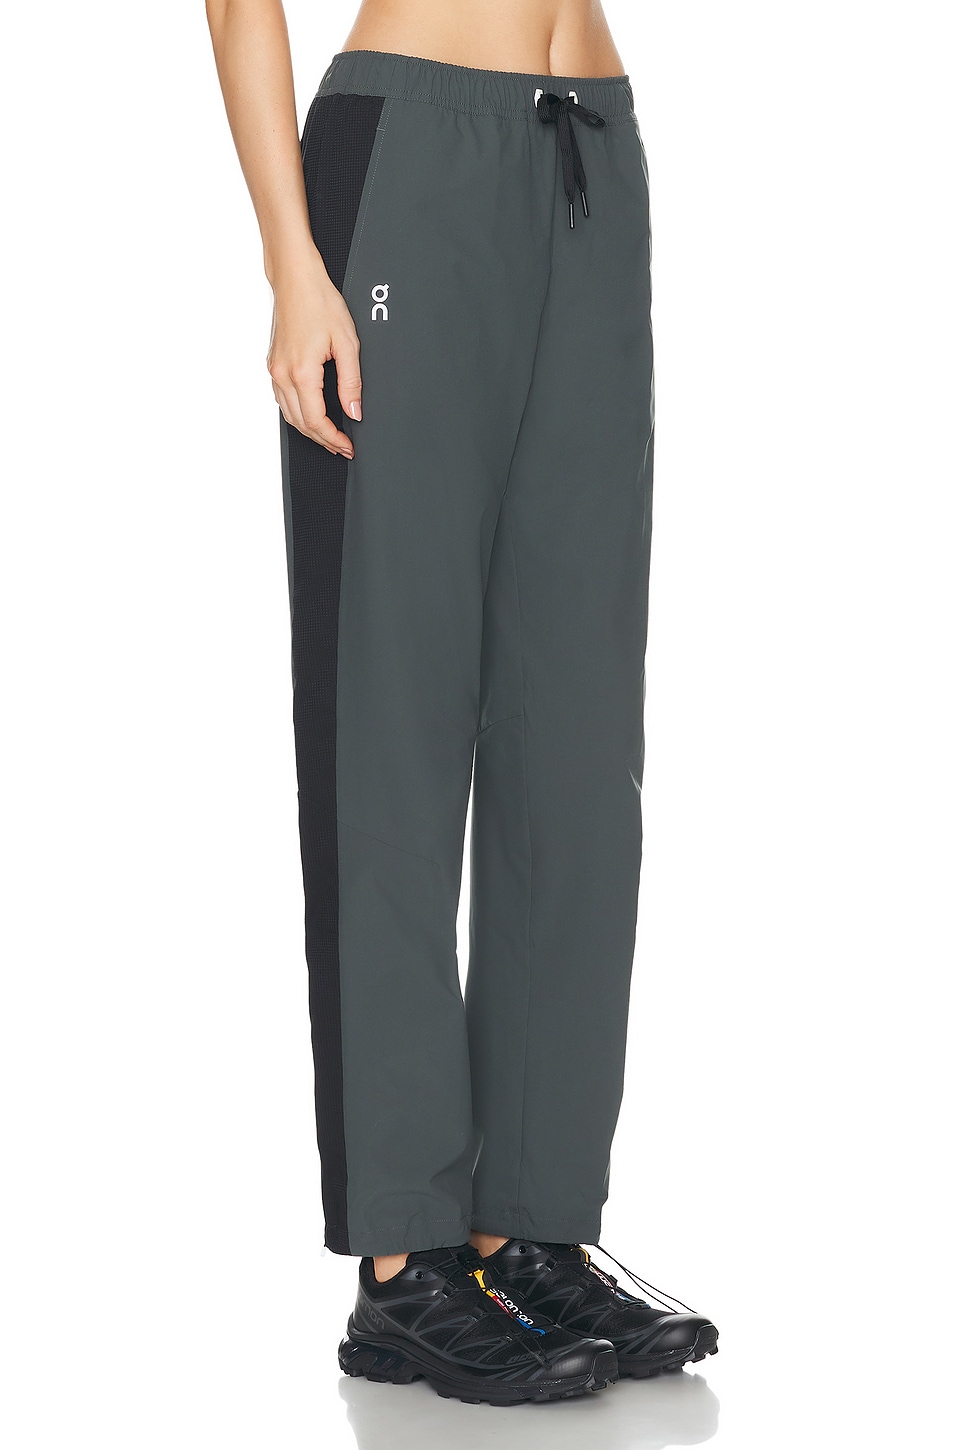 Image 1 of On Track Pant in Lead & Black